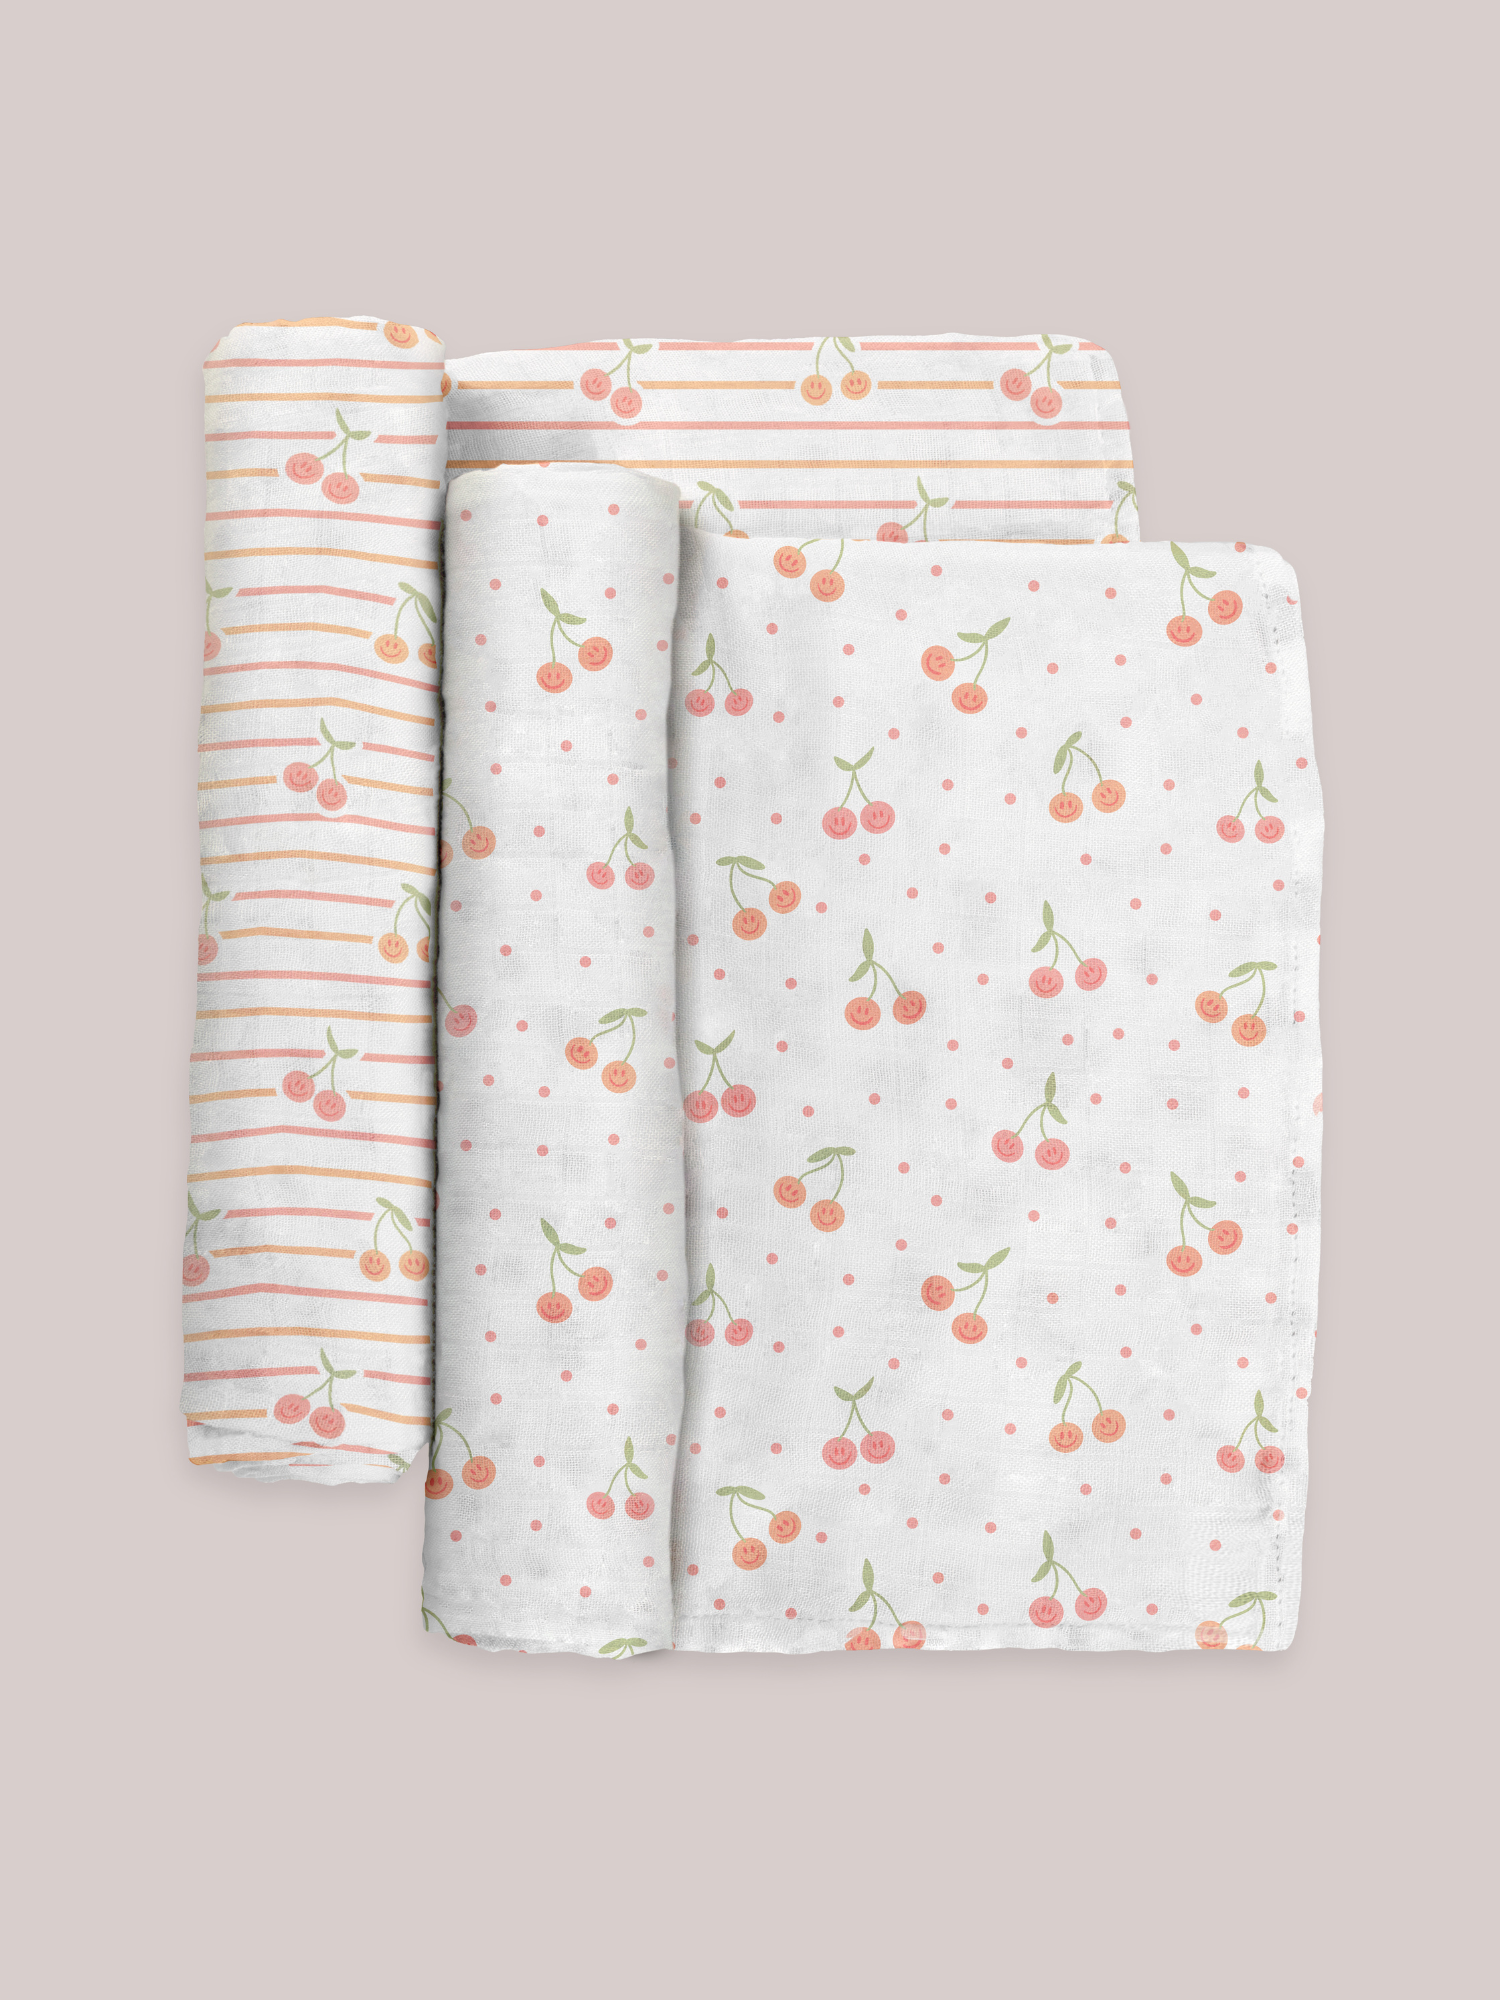 Swaddle Blanket Set - Cherry Cute by Doodle By Meg